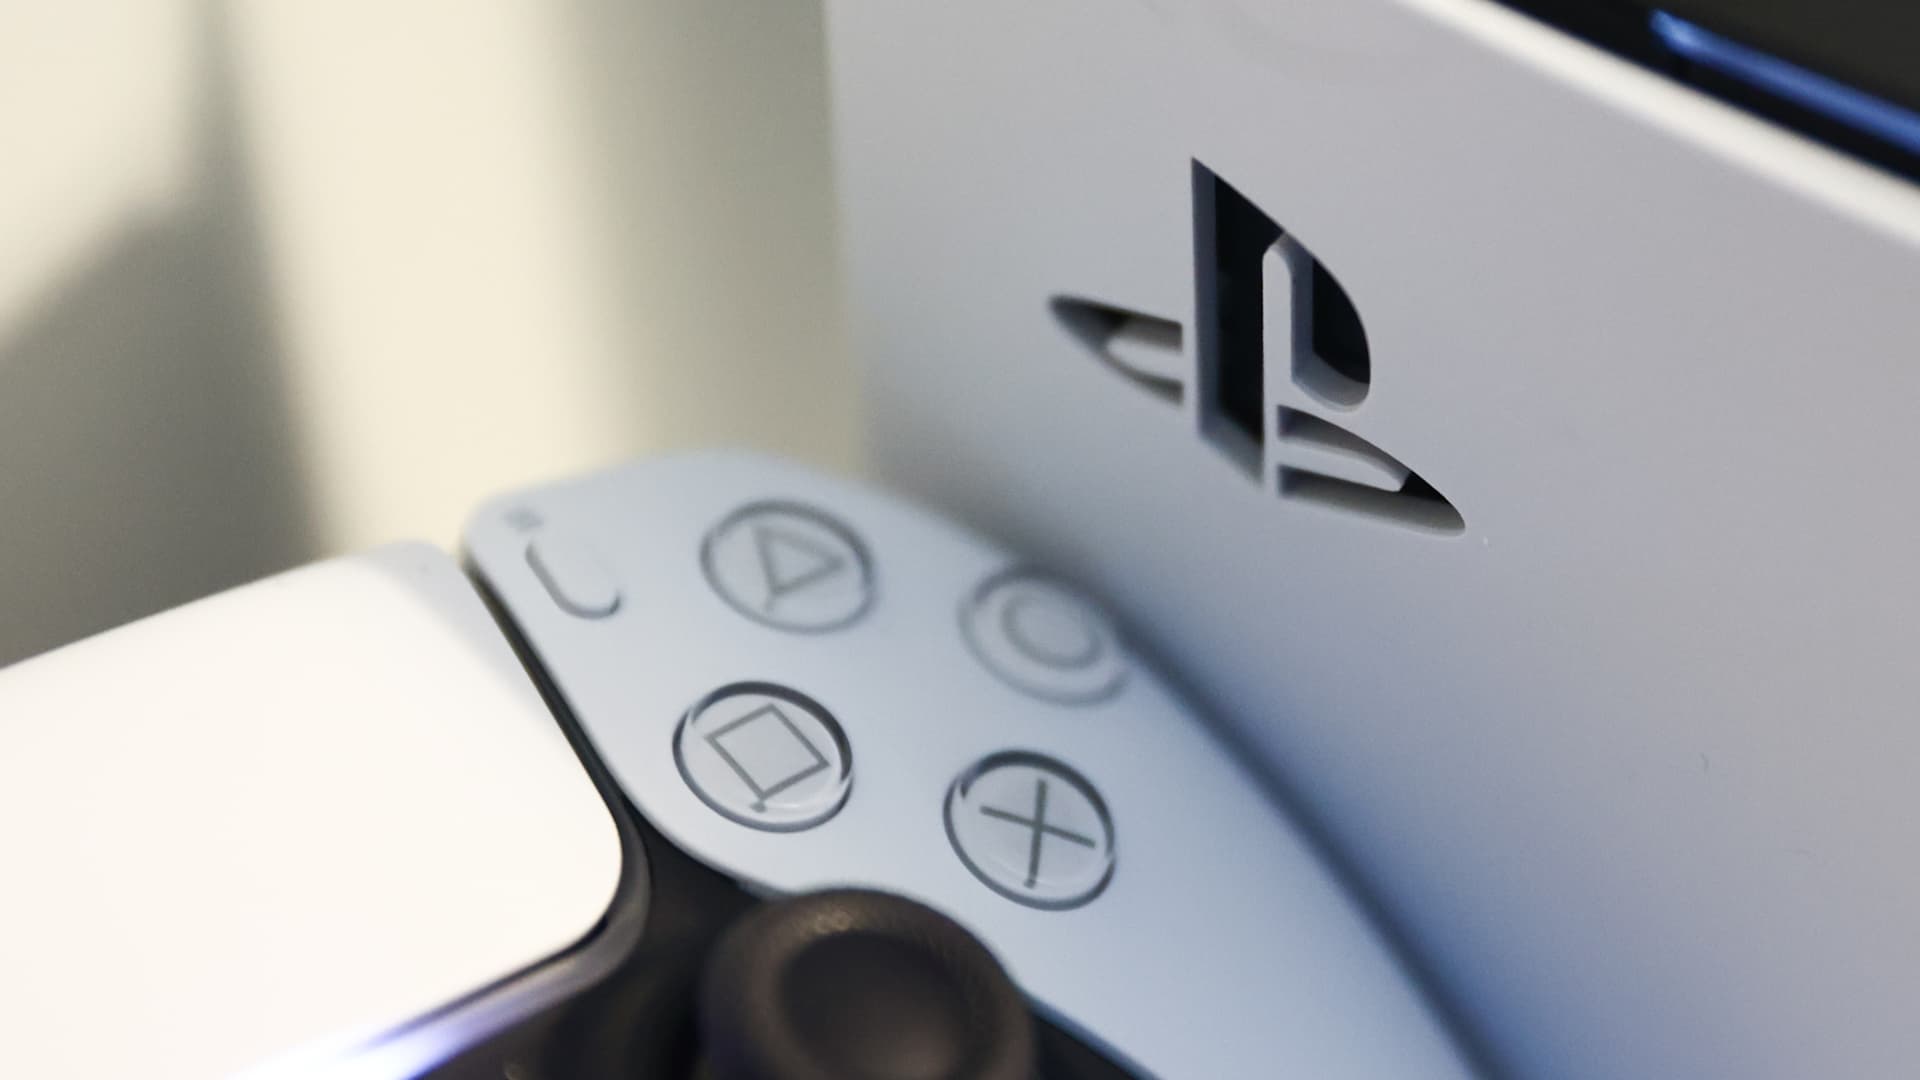 Sony plunged  billion after its PS5 sales cut. But a bigger issue is its near decade low games margin